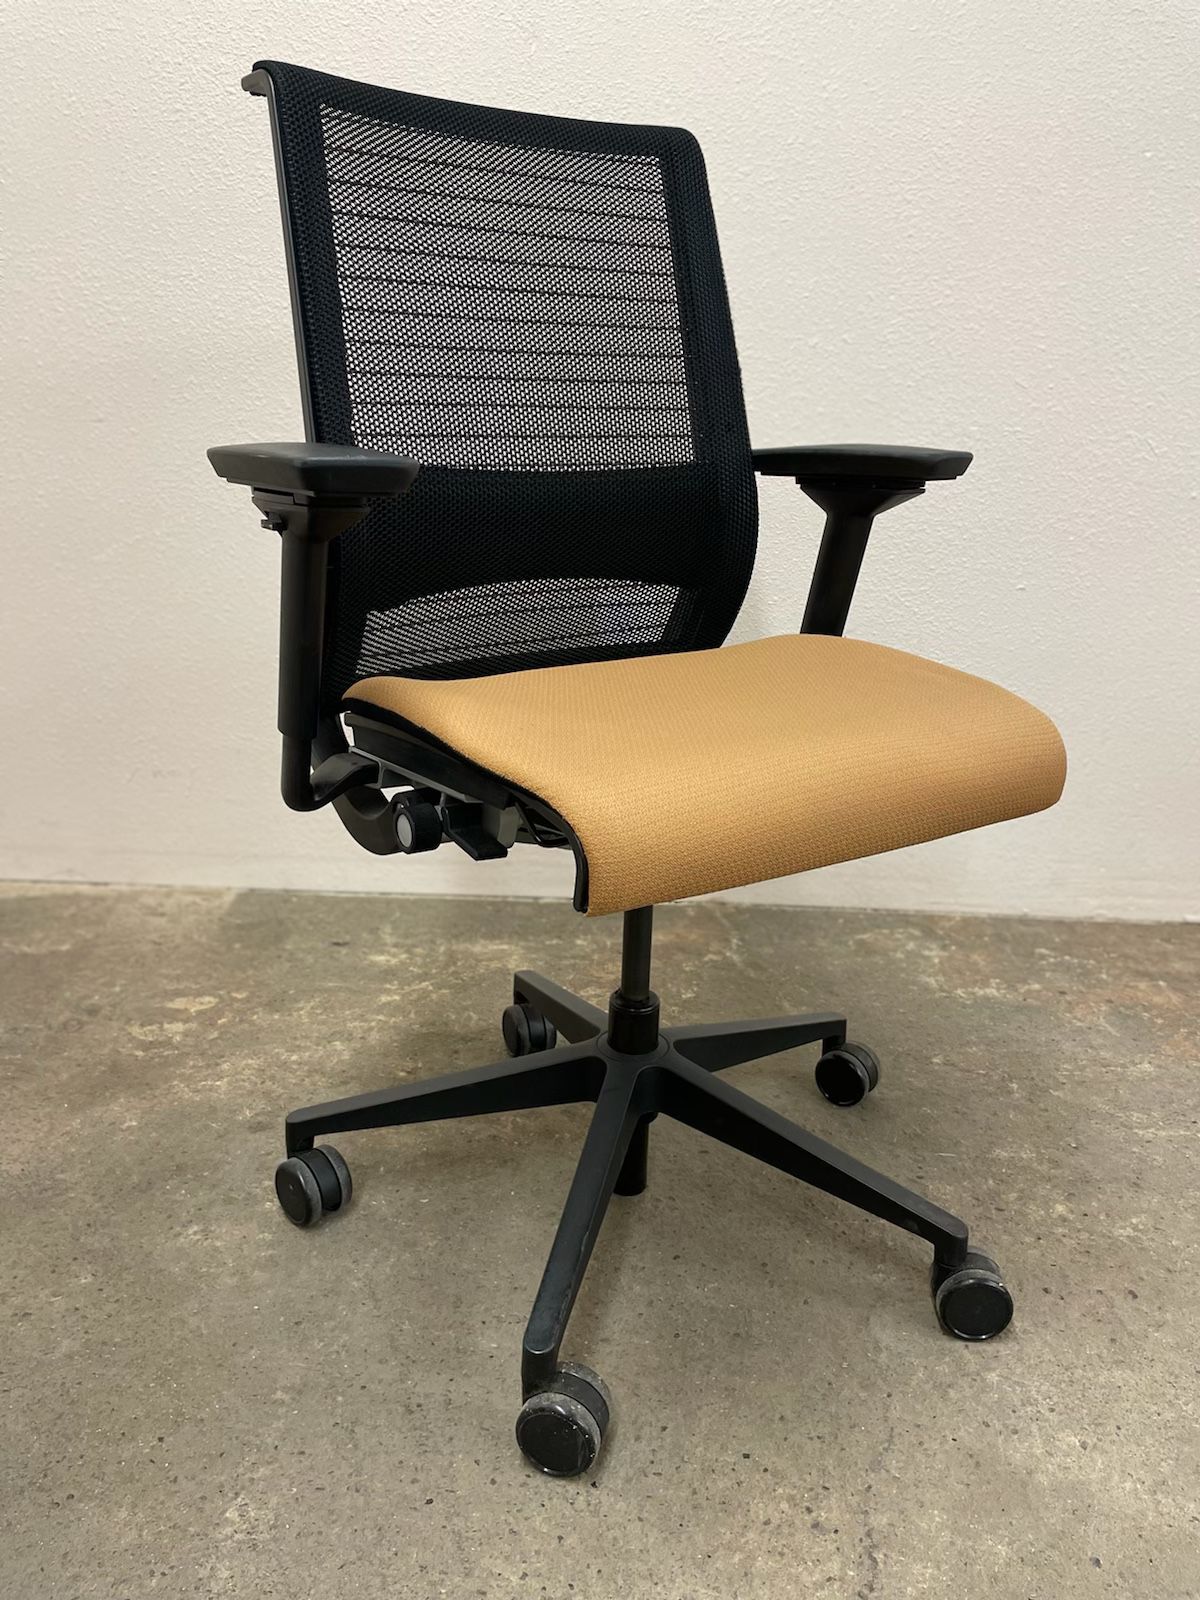 Steelcase Think Chair SALE! $150 Each 12 Left